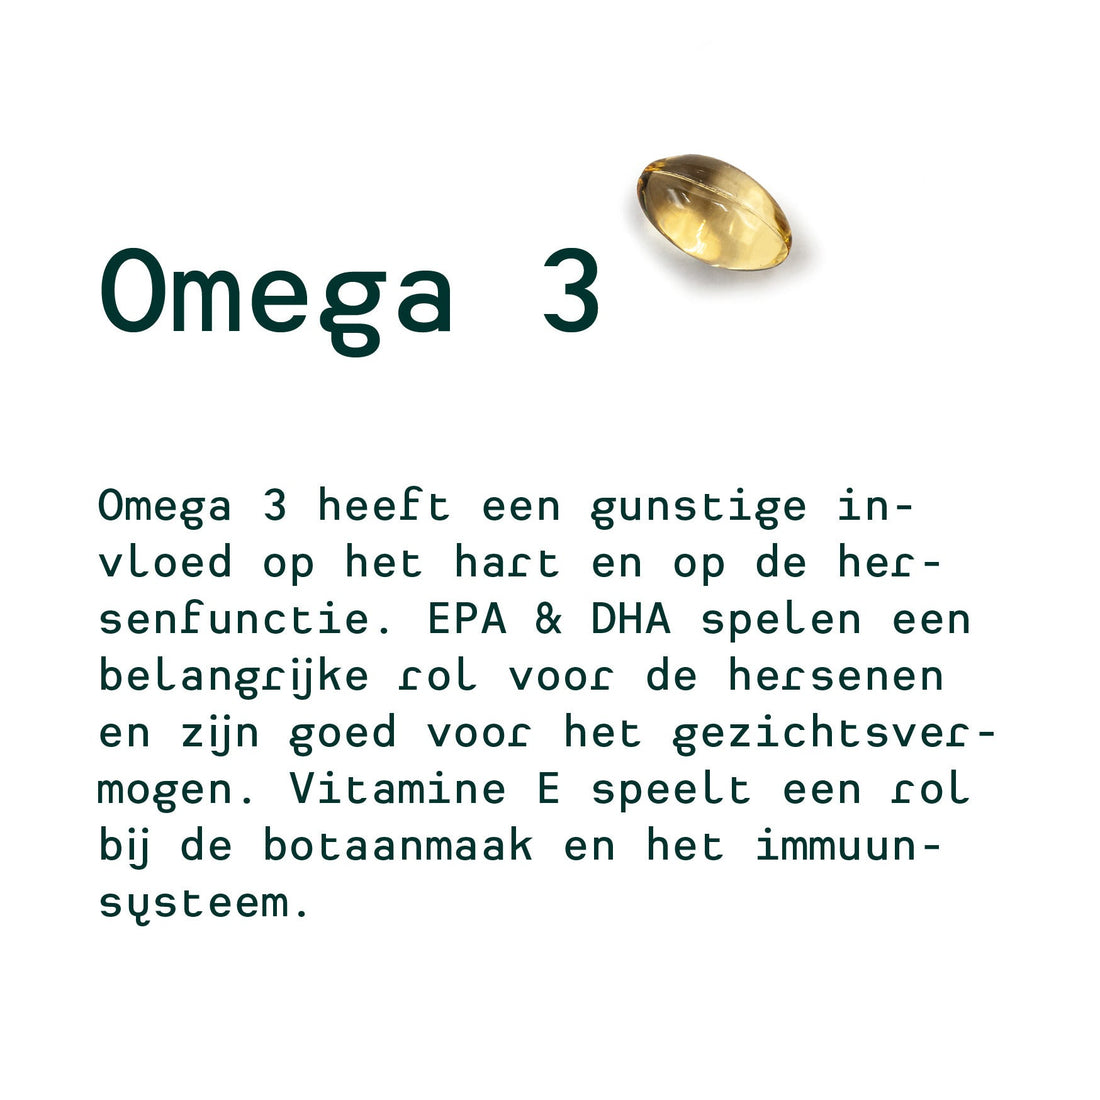 Henk's personal 30-day plan (Ginseng, Vitamin C, Omega 3)